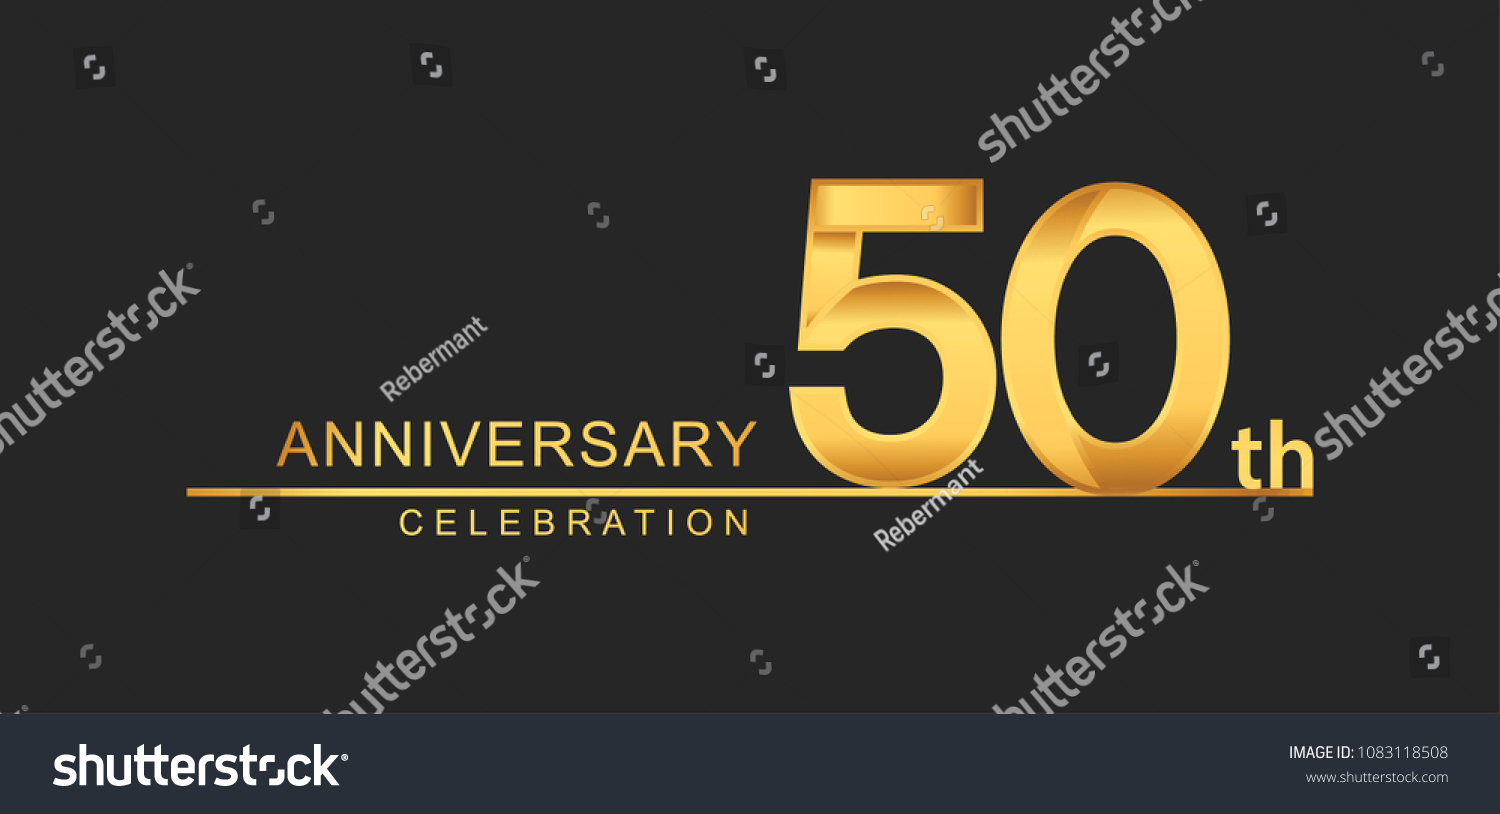 SVG of 50 years anniversary celebration with elegant golden color isolated on black background, design for anniversary celebration.
 svg